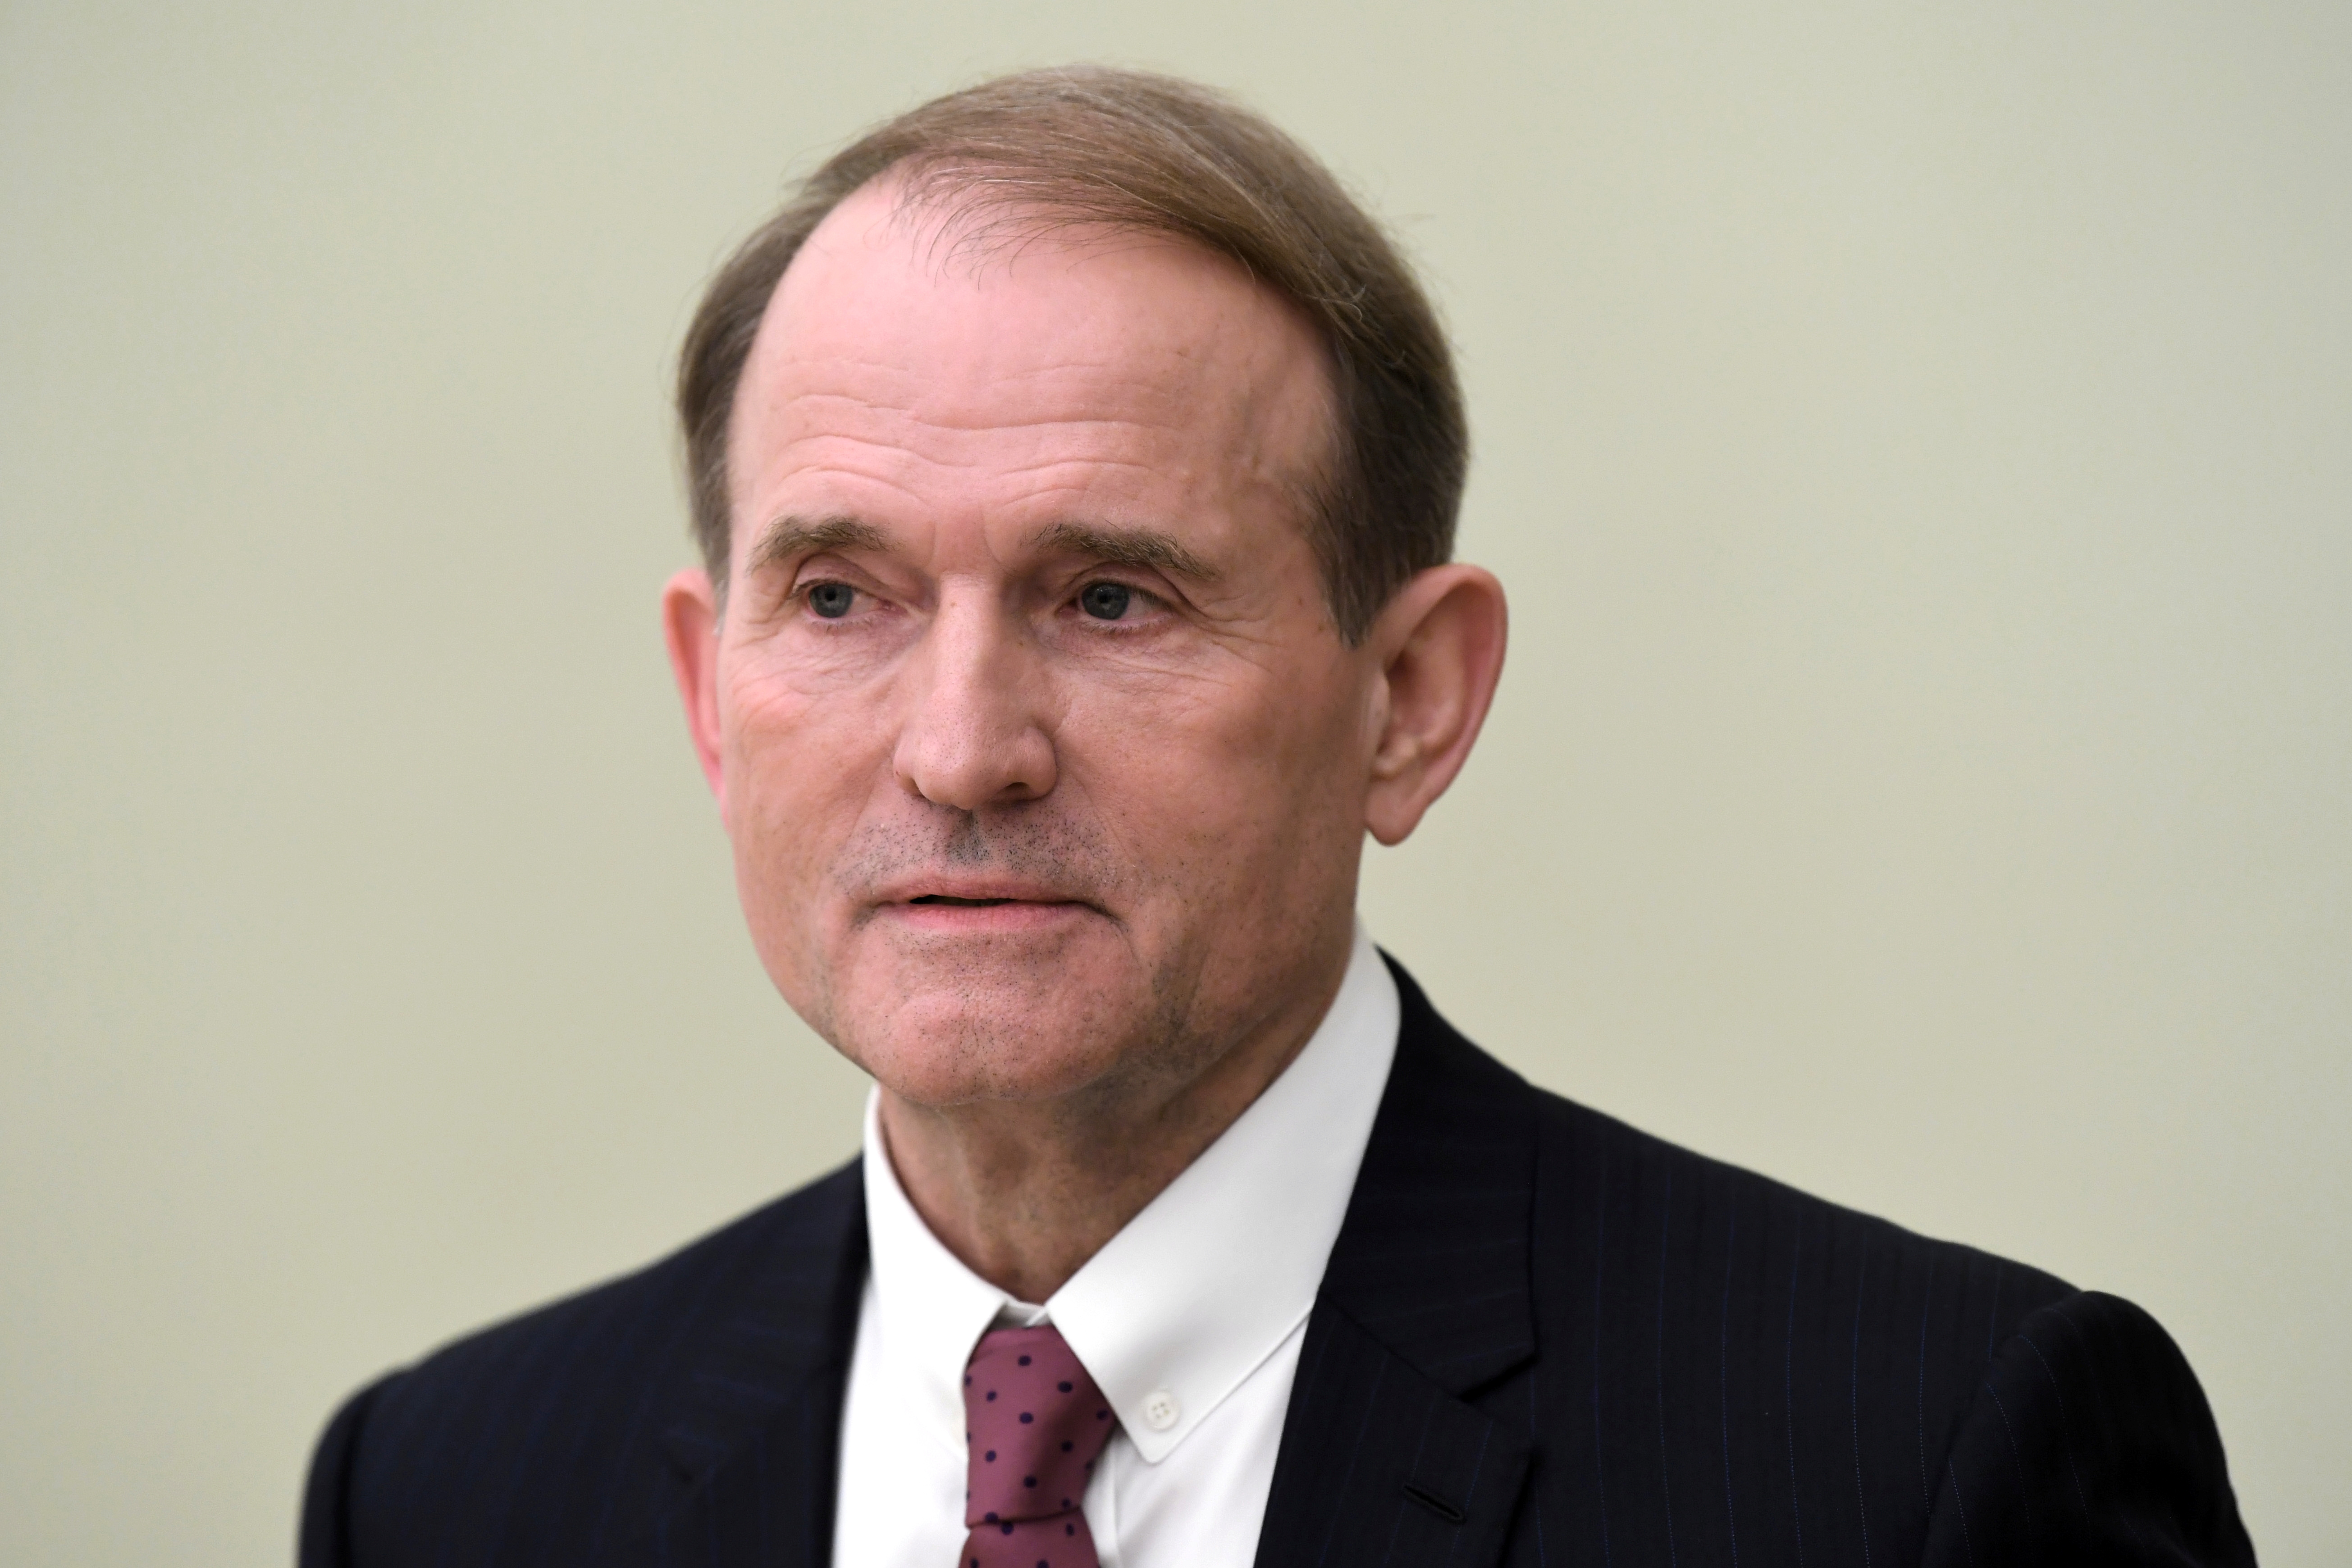 Leader of Ukraine’s Opposition Platform - For Life party Medvedchuk meets with Russia's President Putin in Moscow